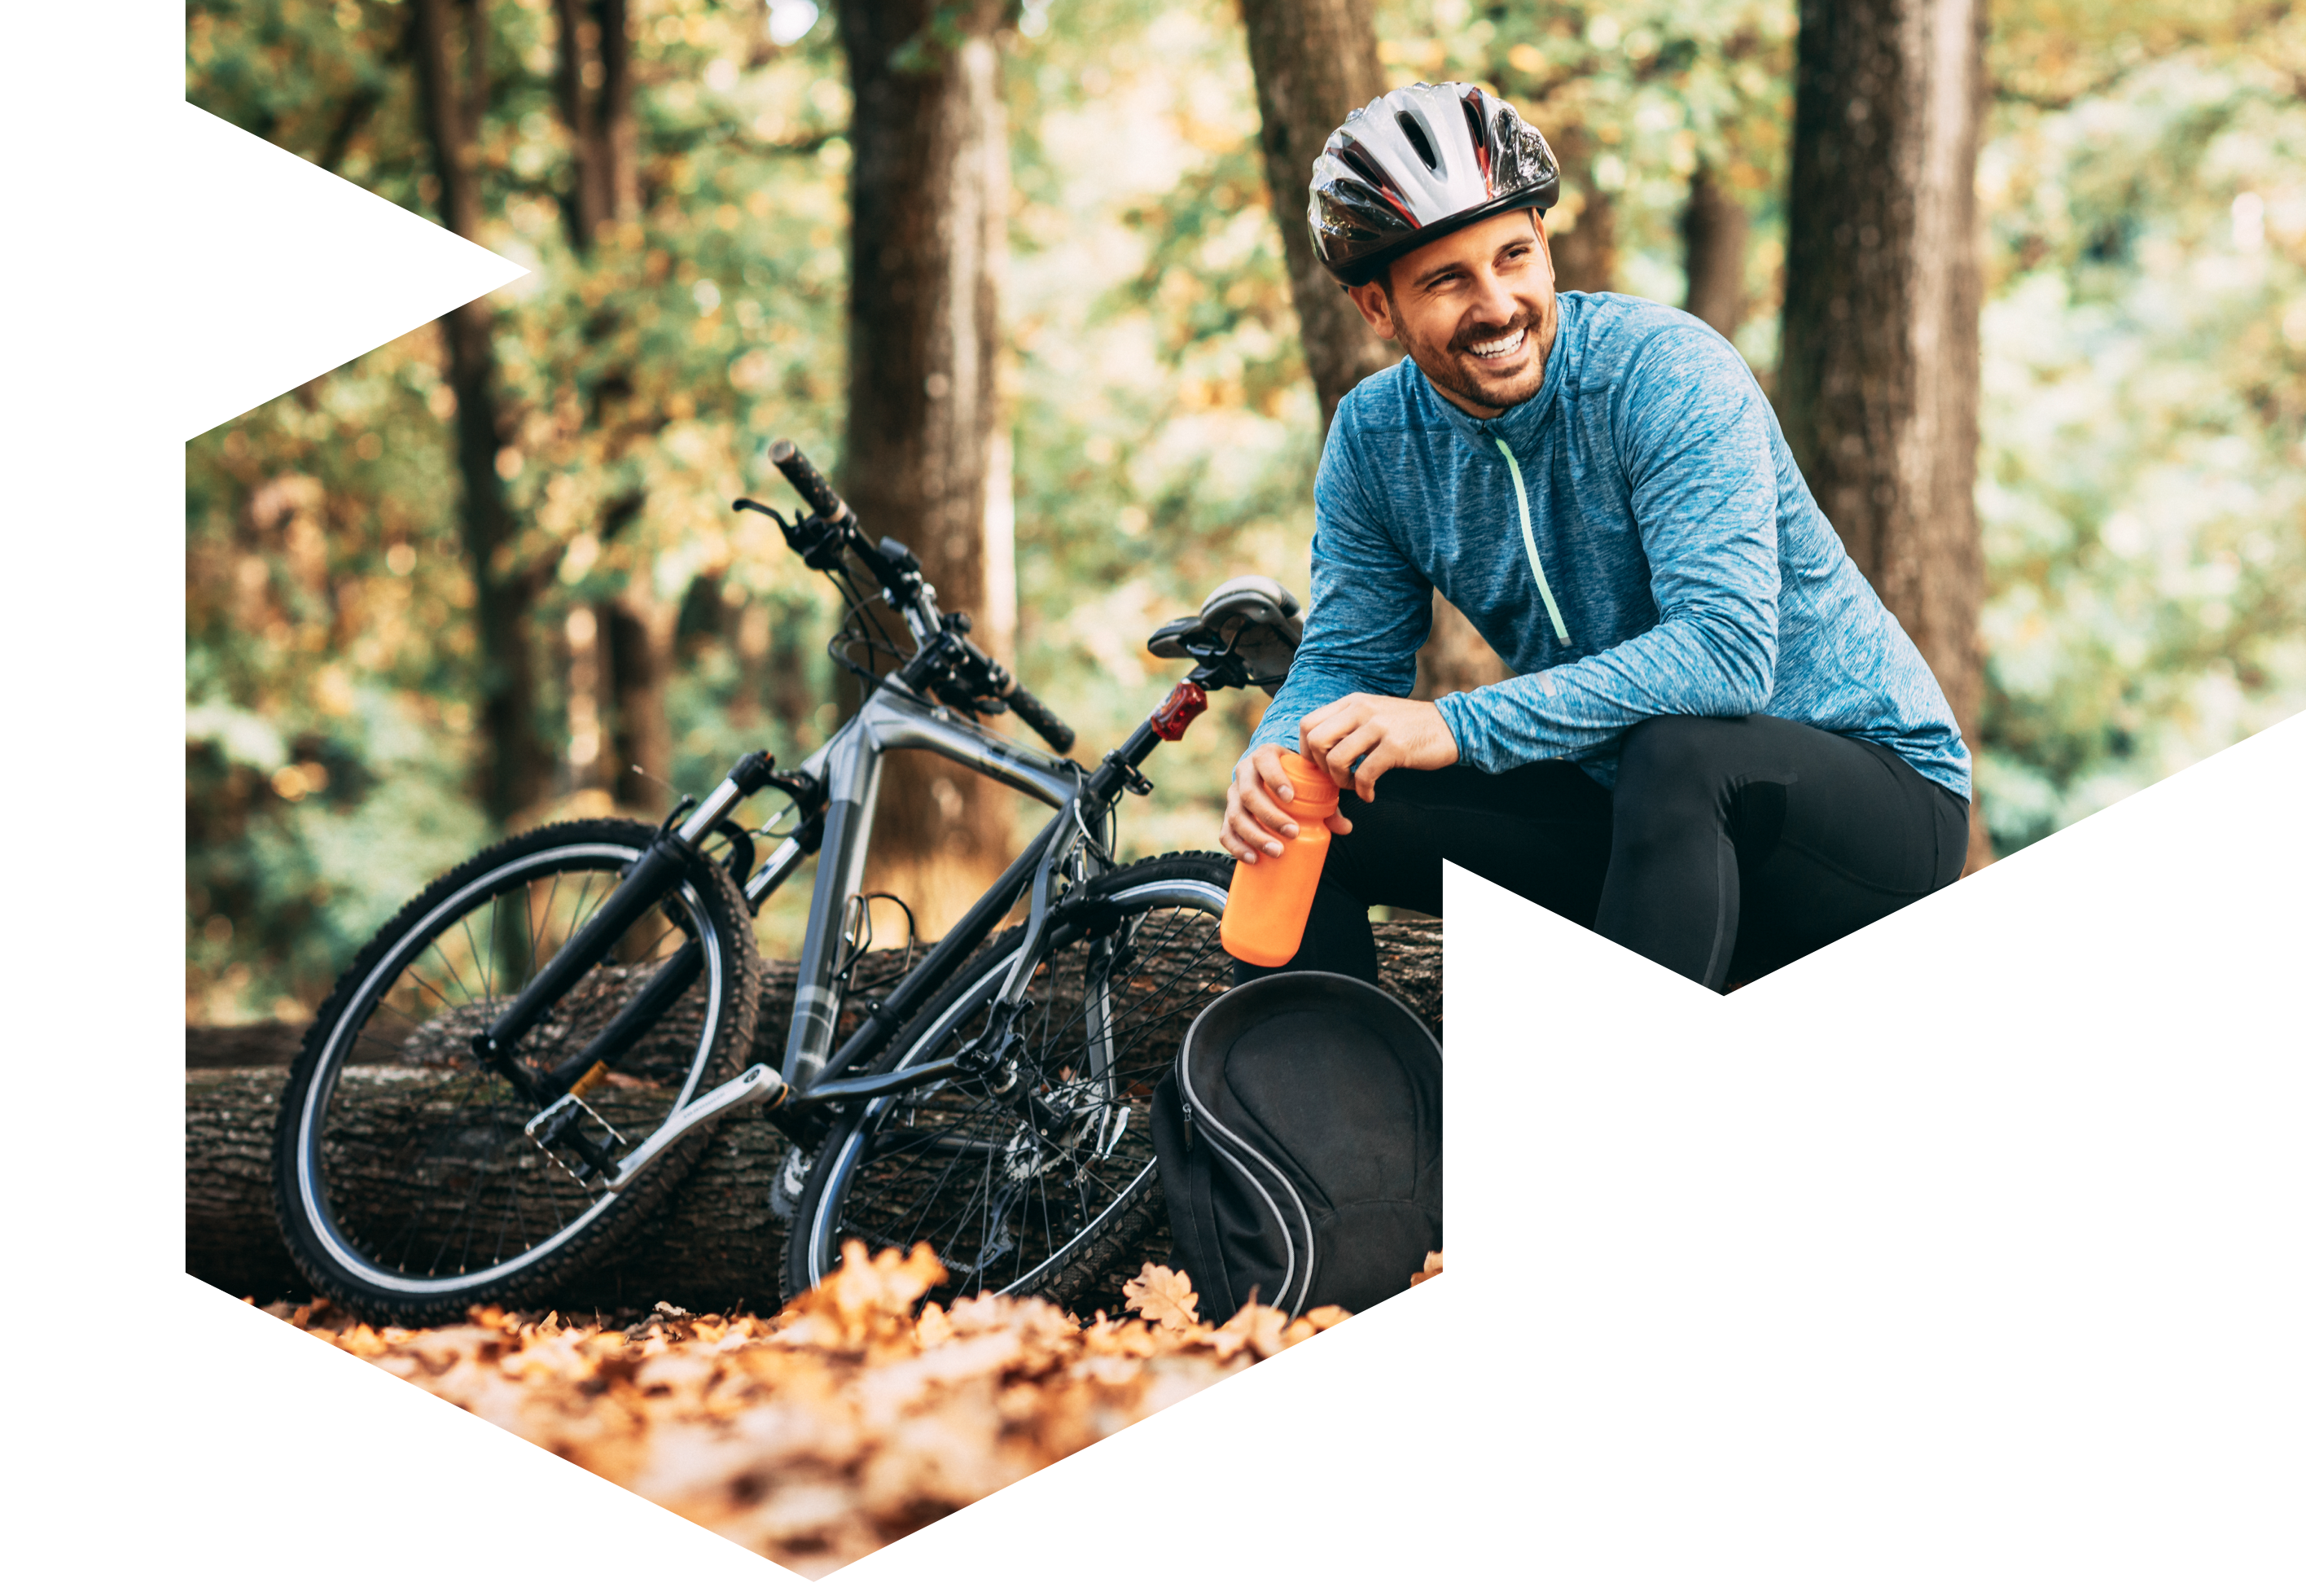 How Bikes.de simplified its online marketplace with flexible, composable architecture to supercharge growth.